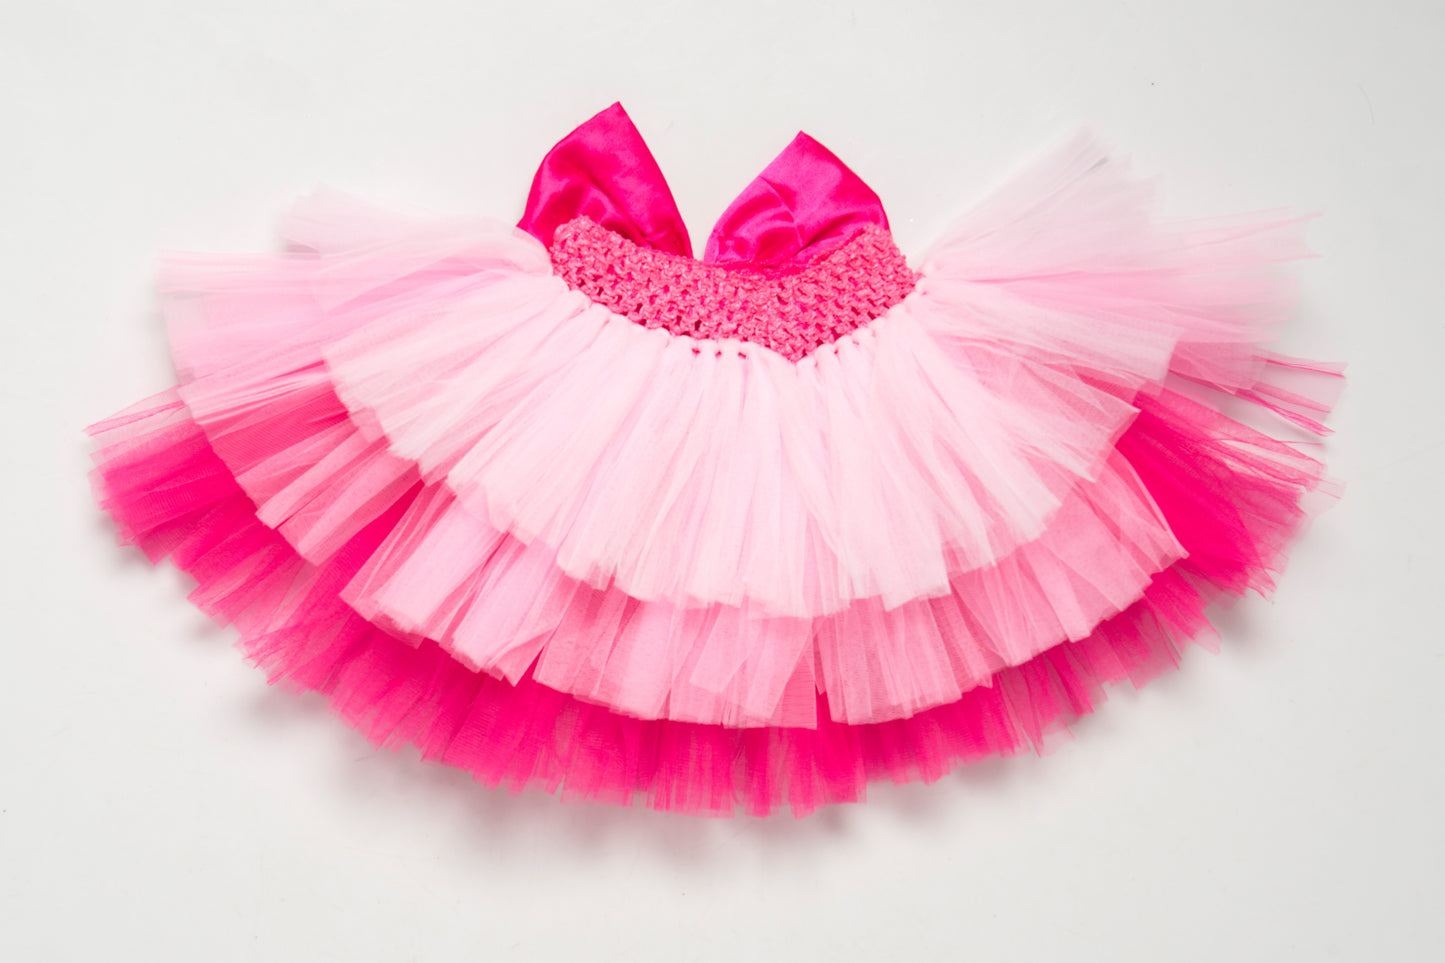 Pink Layers Tutu Skirt  with Bow